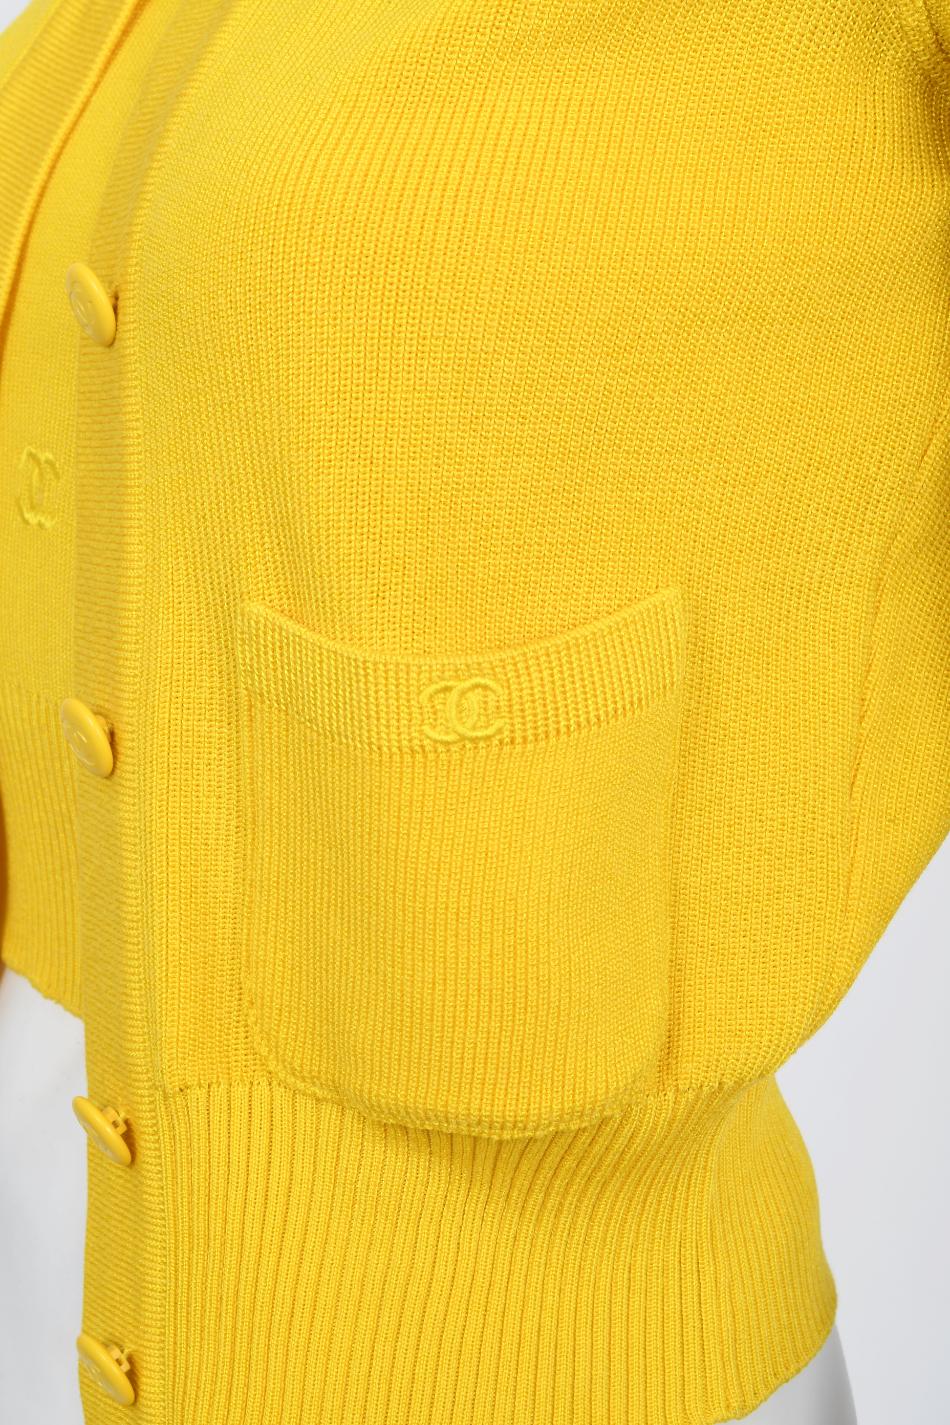 Vintage 1996 Chanel by Karl Lagerfeld Runway Yellow Knit Cropped Sweater Set  2